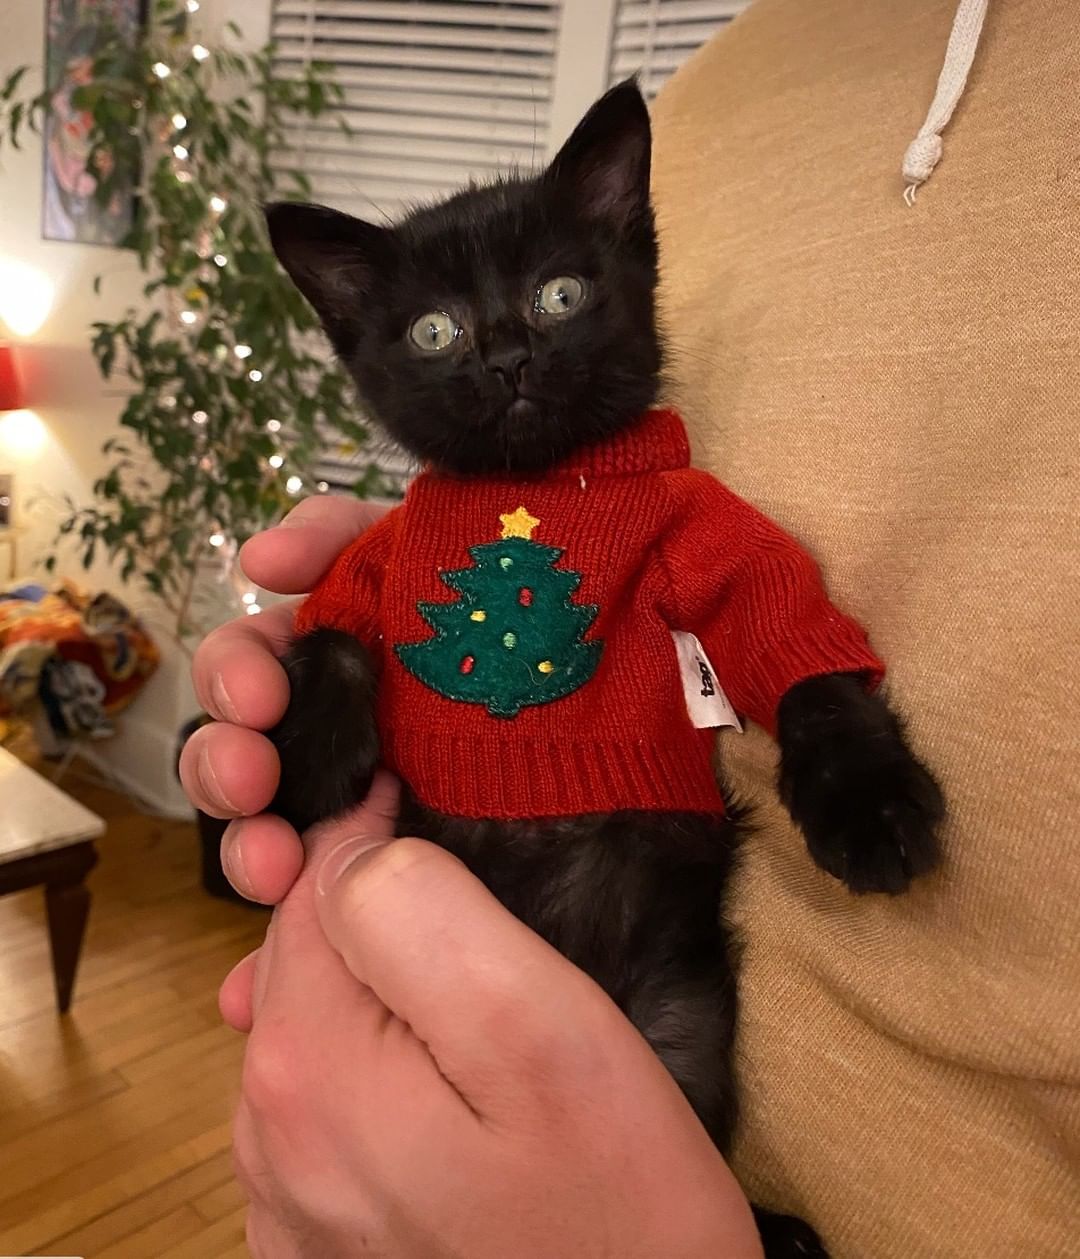 'Tis officially the season! The Baby is looking as cute as ever in her holiday sweater. Believe it or not, this sweater was not intended for a kitten. Can you guess what it first belonged to? Put your guesses in the comments!